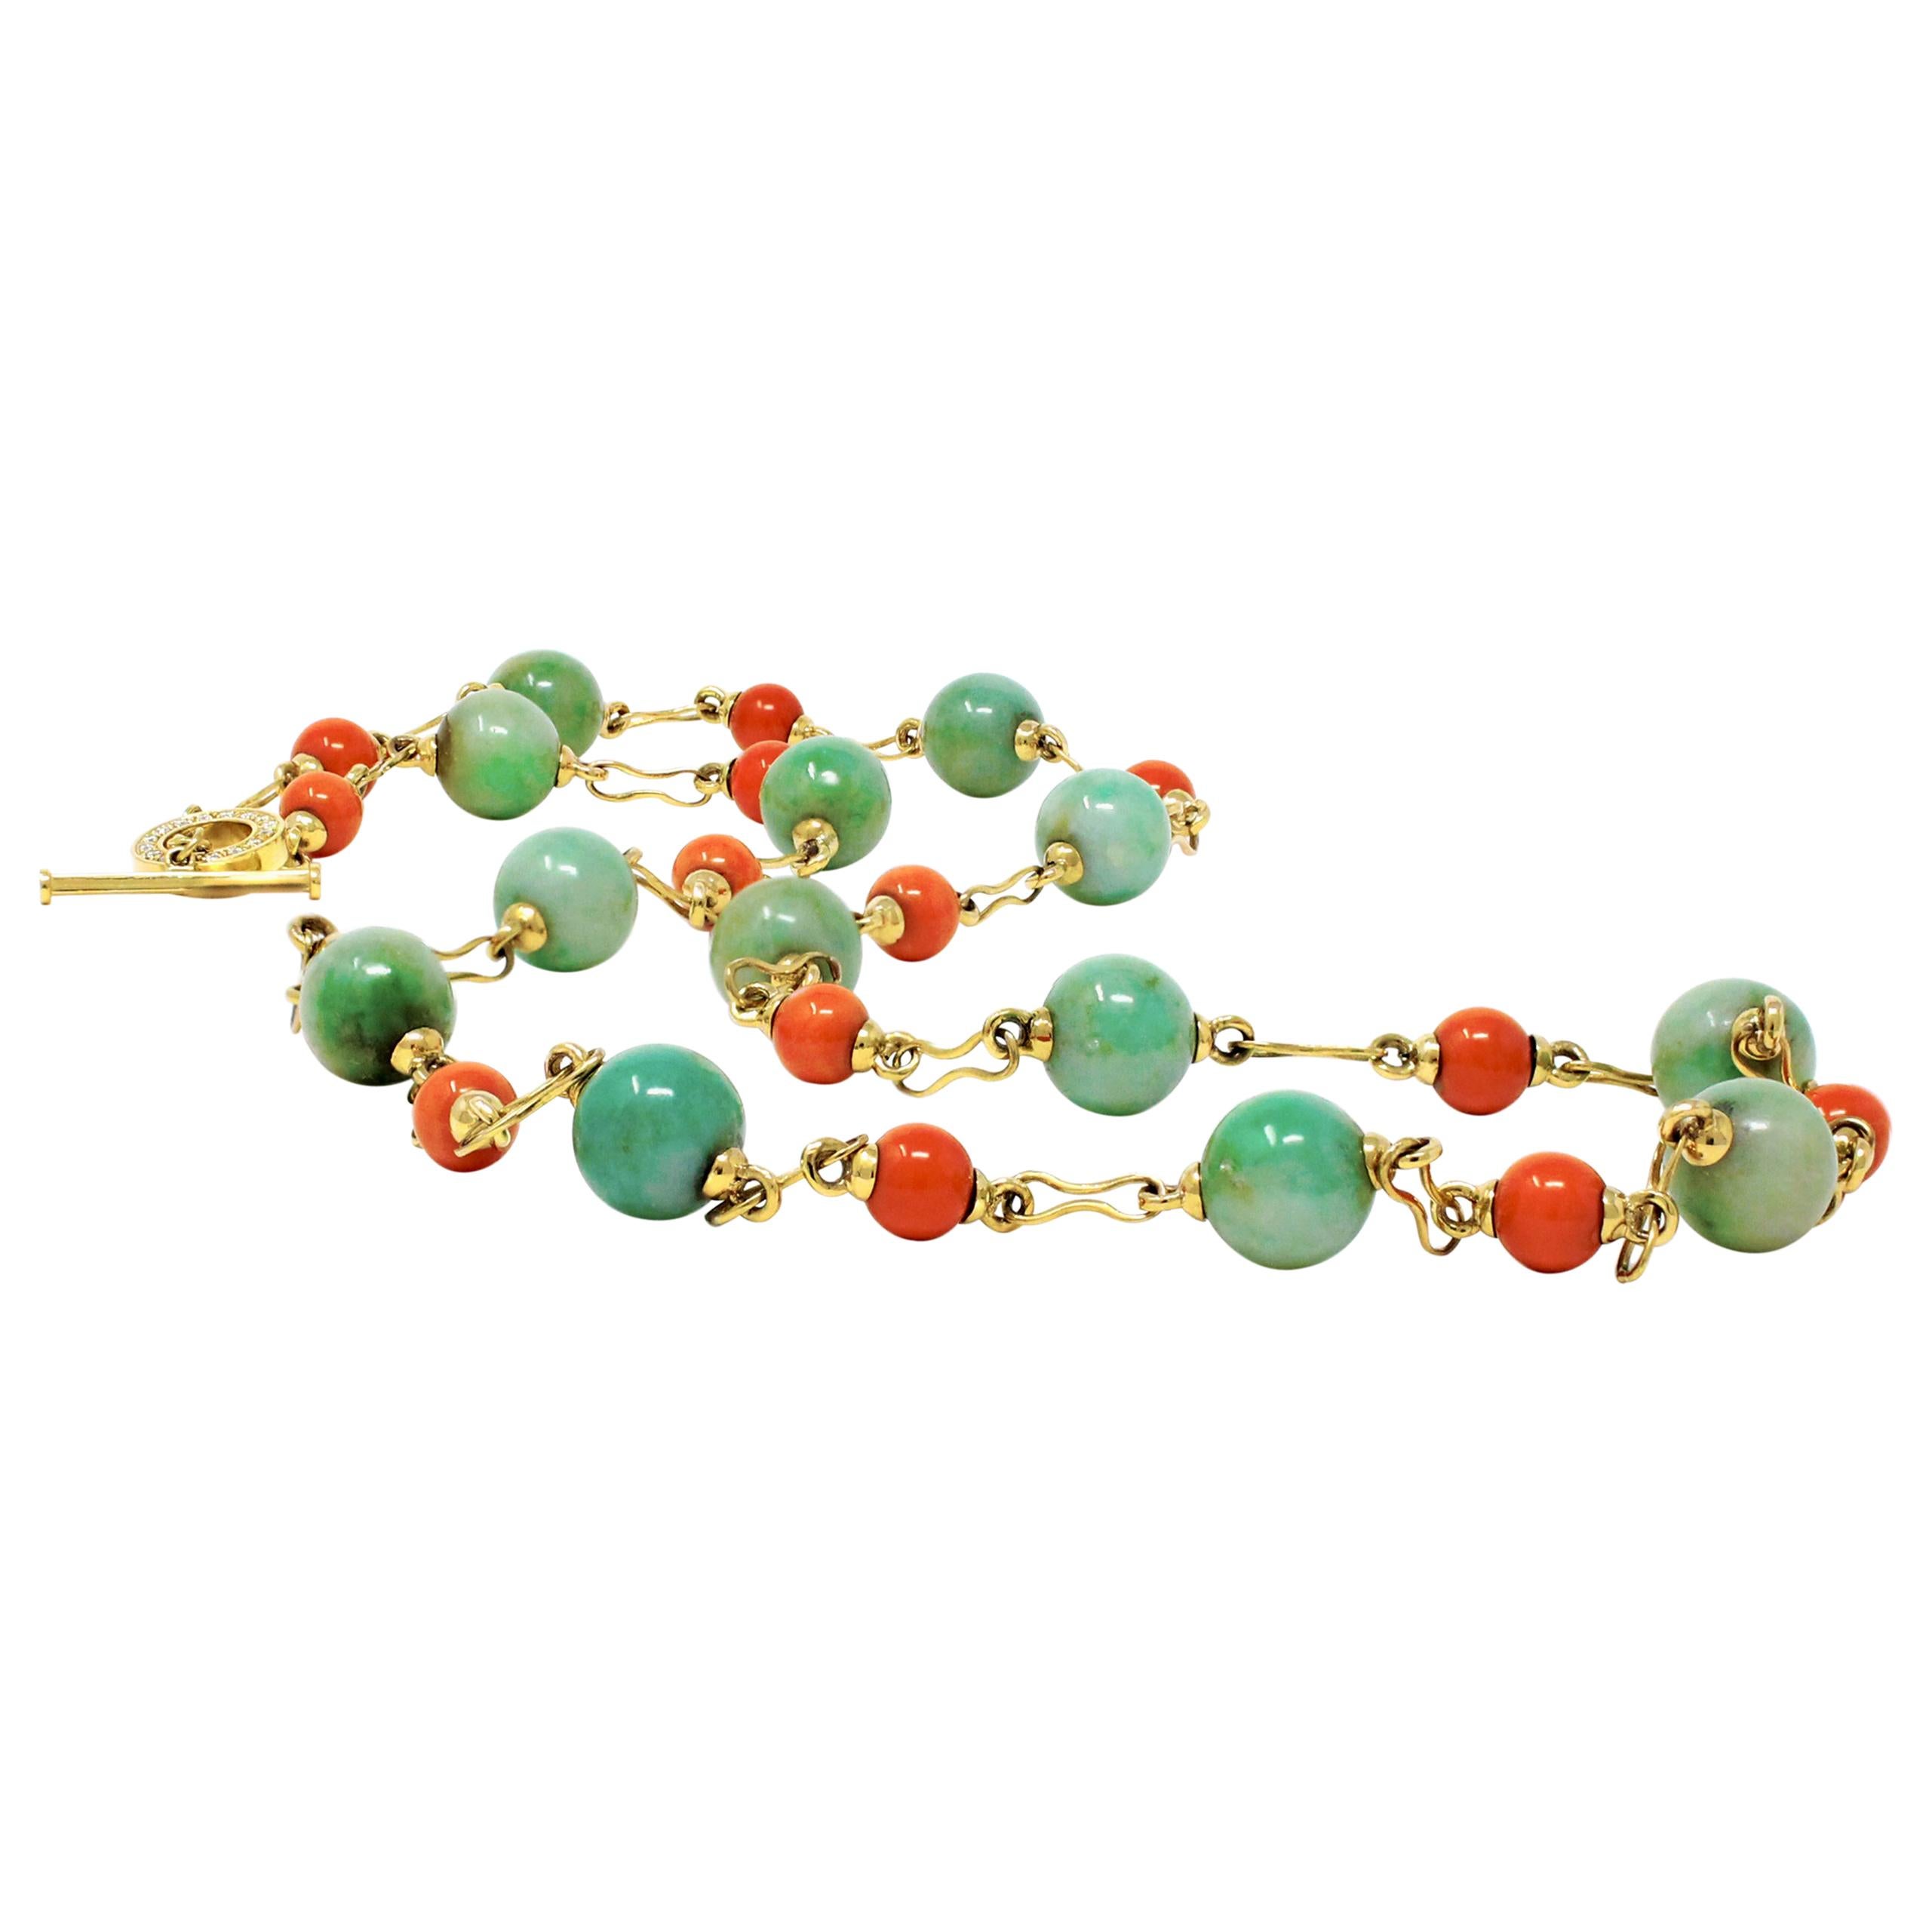 Coral and Jadeite Jade Station Necklace, 18 Karat Yellow Gold by Rosaria Varra